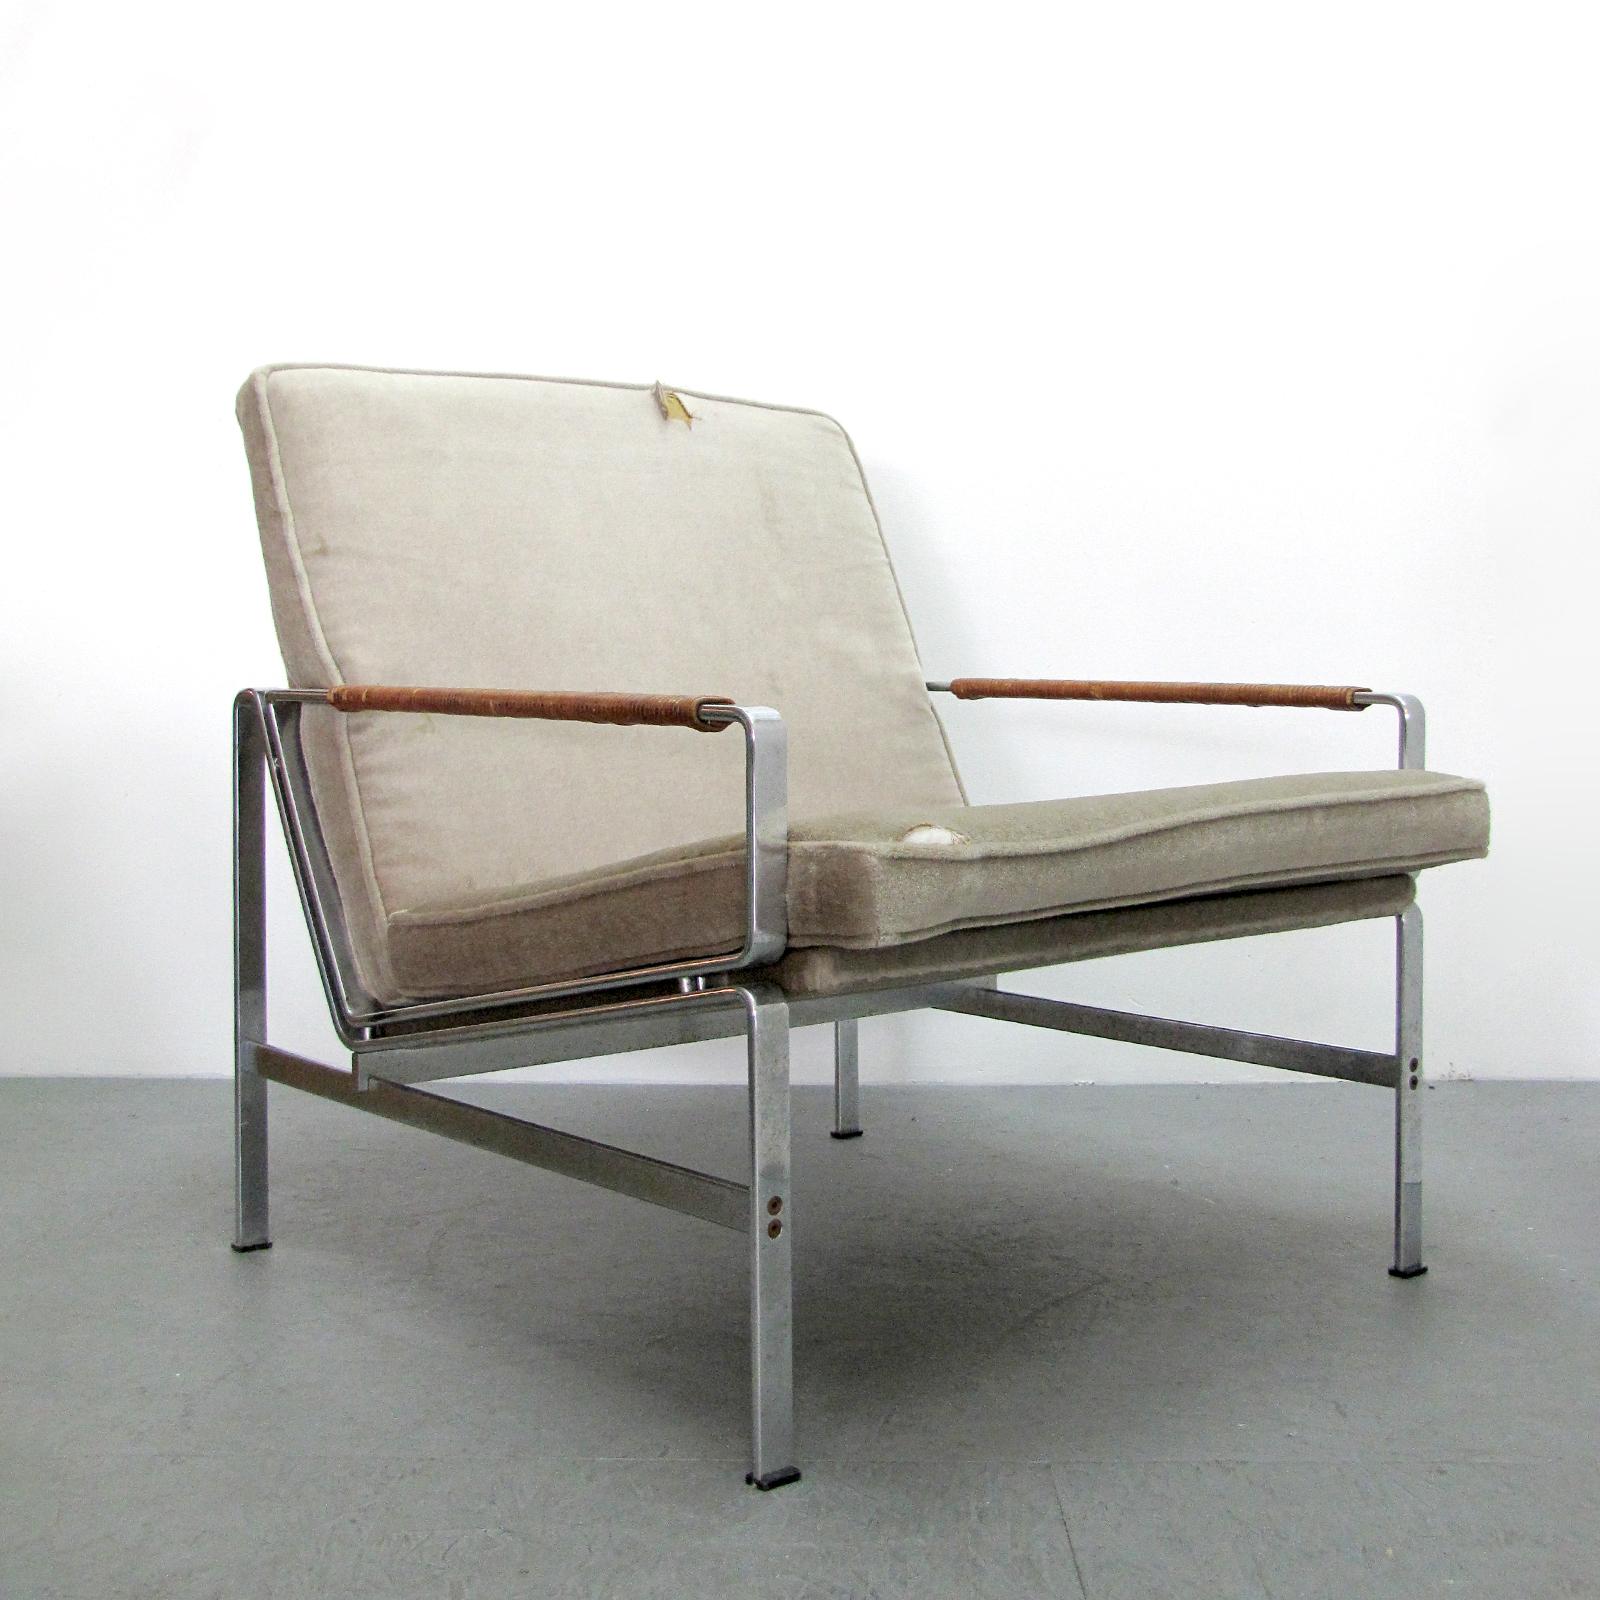 Wonderful original Fabricius & Kastholm lounge chair FK 6720 in steel with leather wrapped arm rests, original tan/grey mohair upholstery with tears & staining.